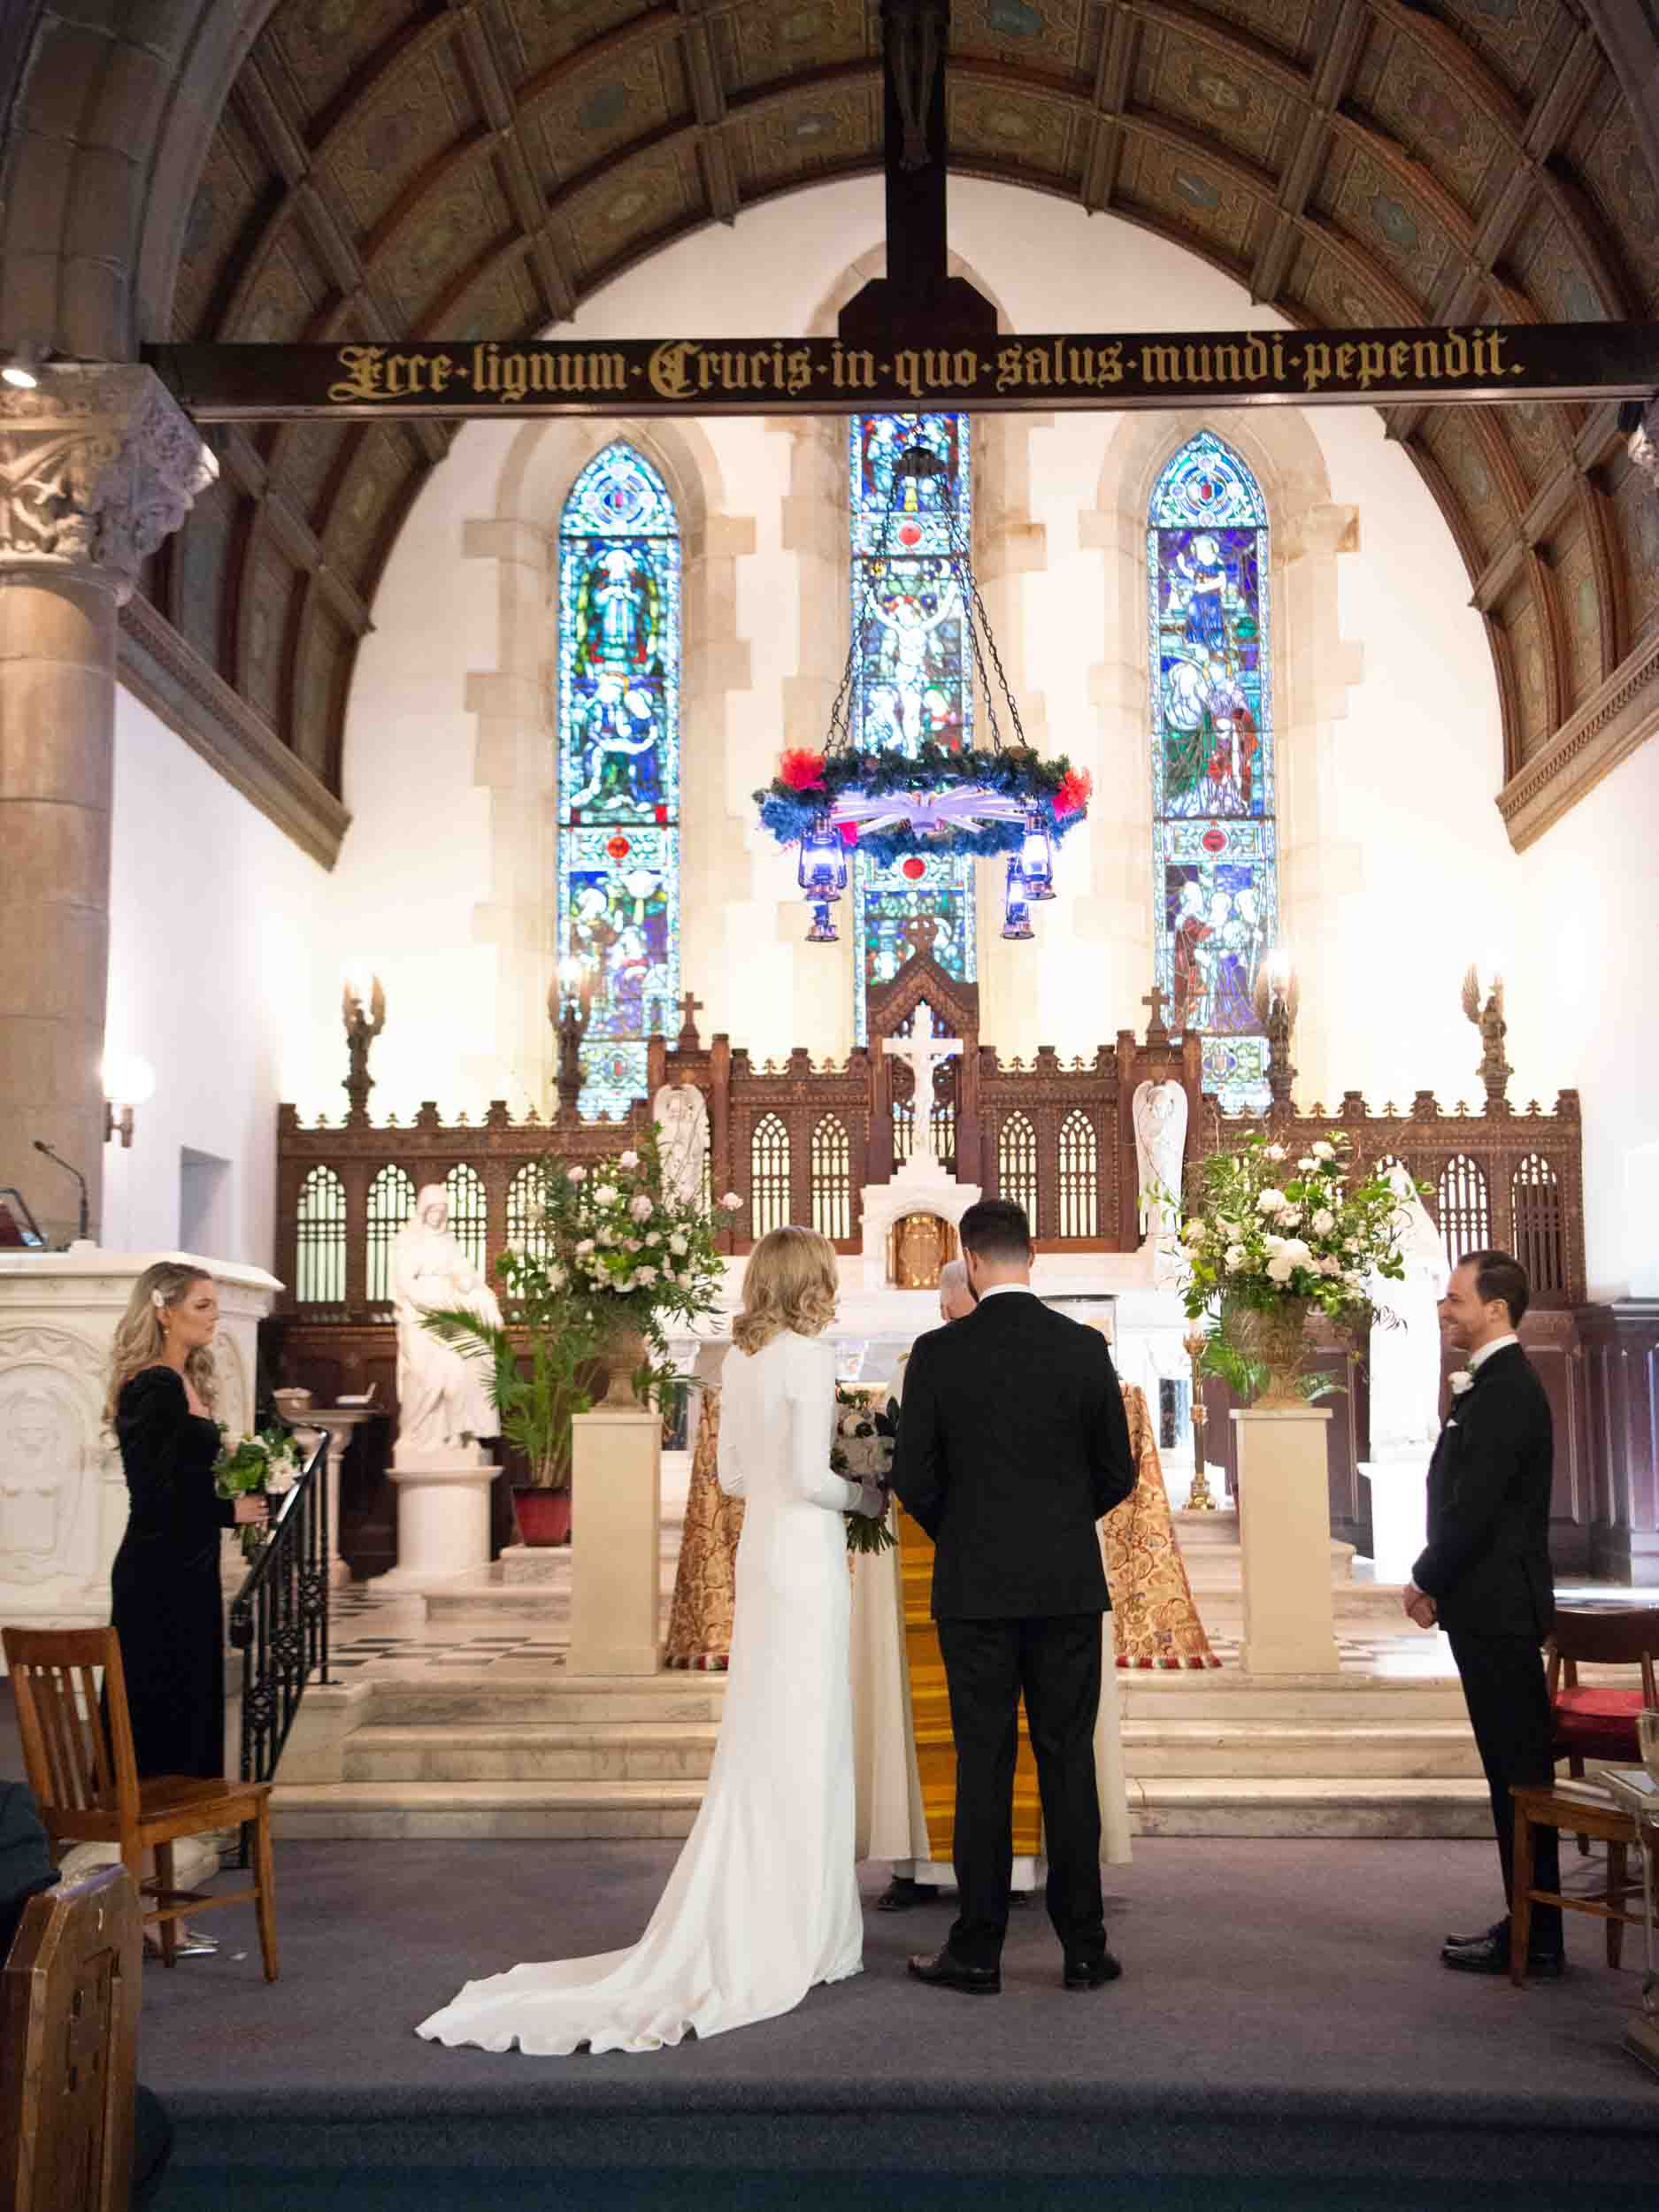 Bride and groom at the altar in a Catholic Church